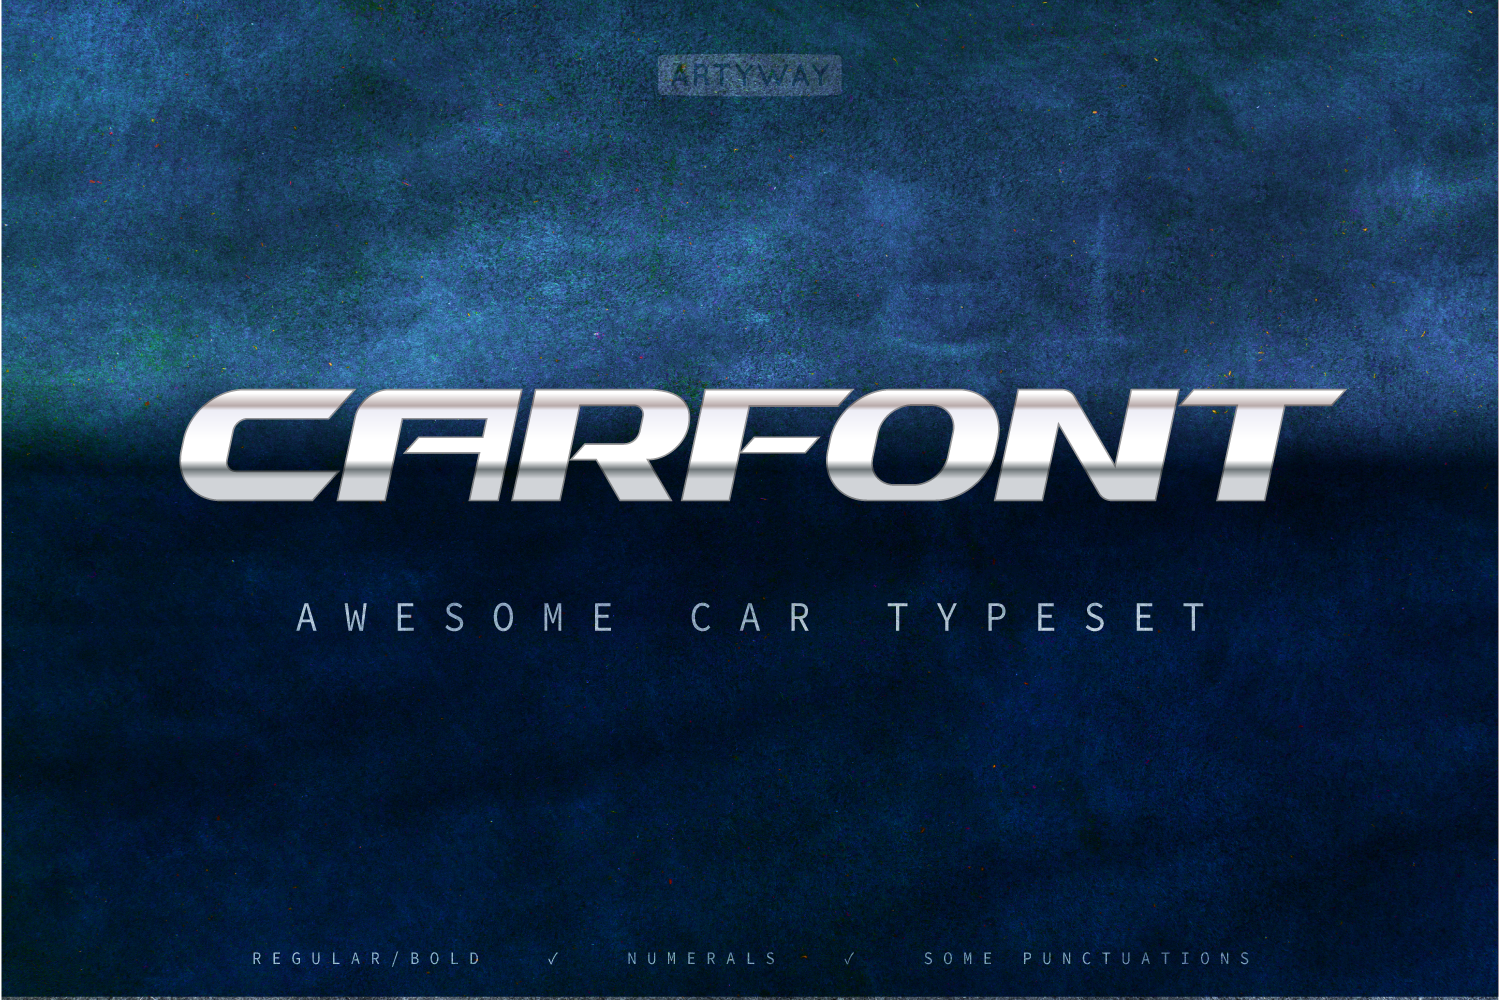 Carfont for sport and tech headline and logo